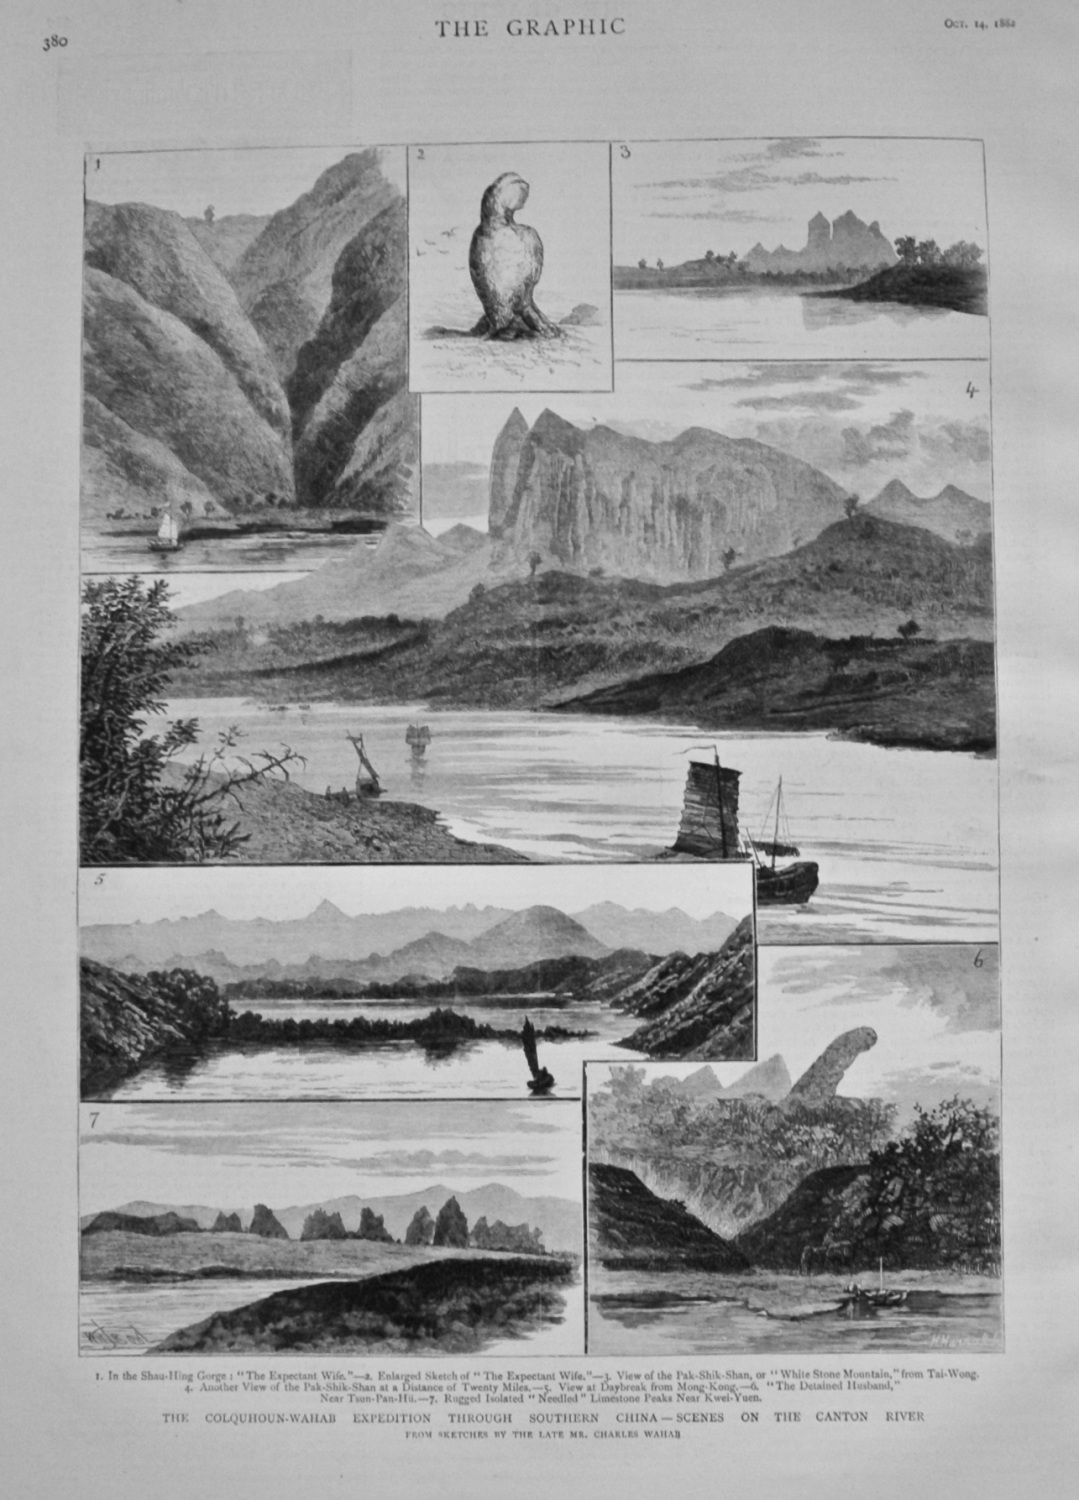 The Colquhoun-Wahab  Expedition Through Southern China - Scenes on the Cant